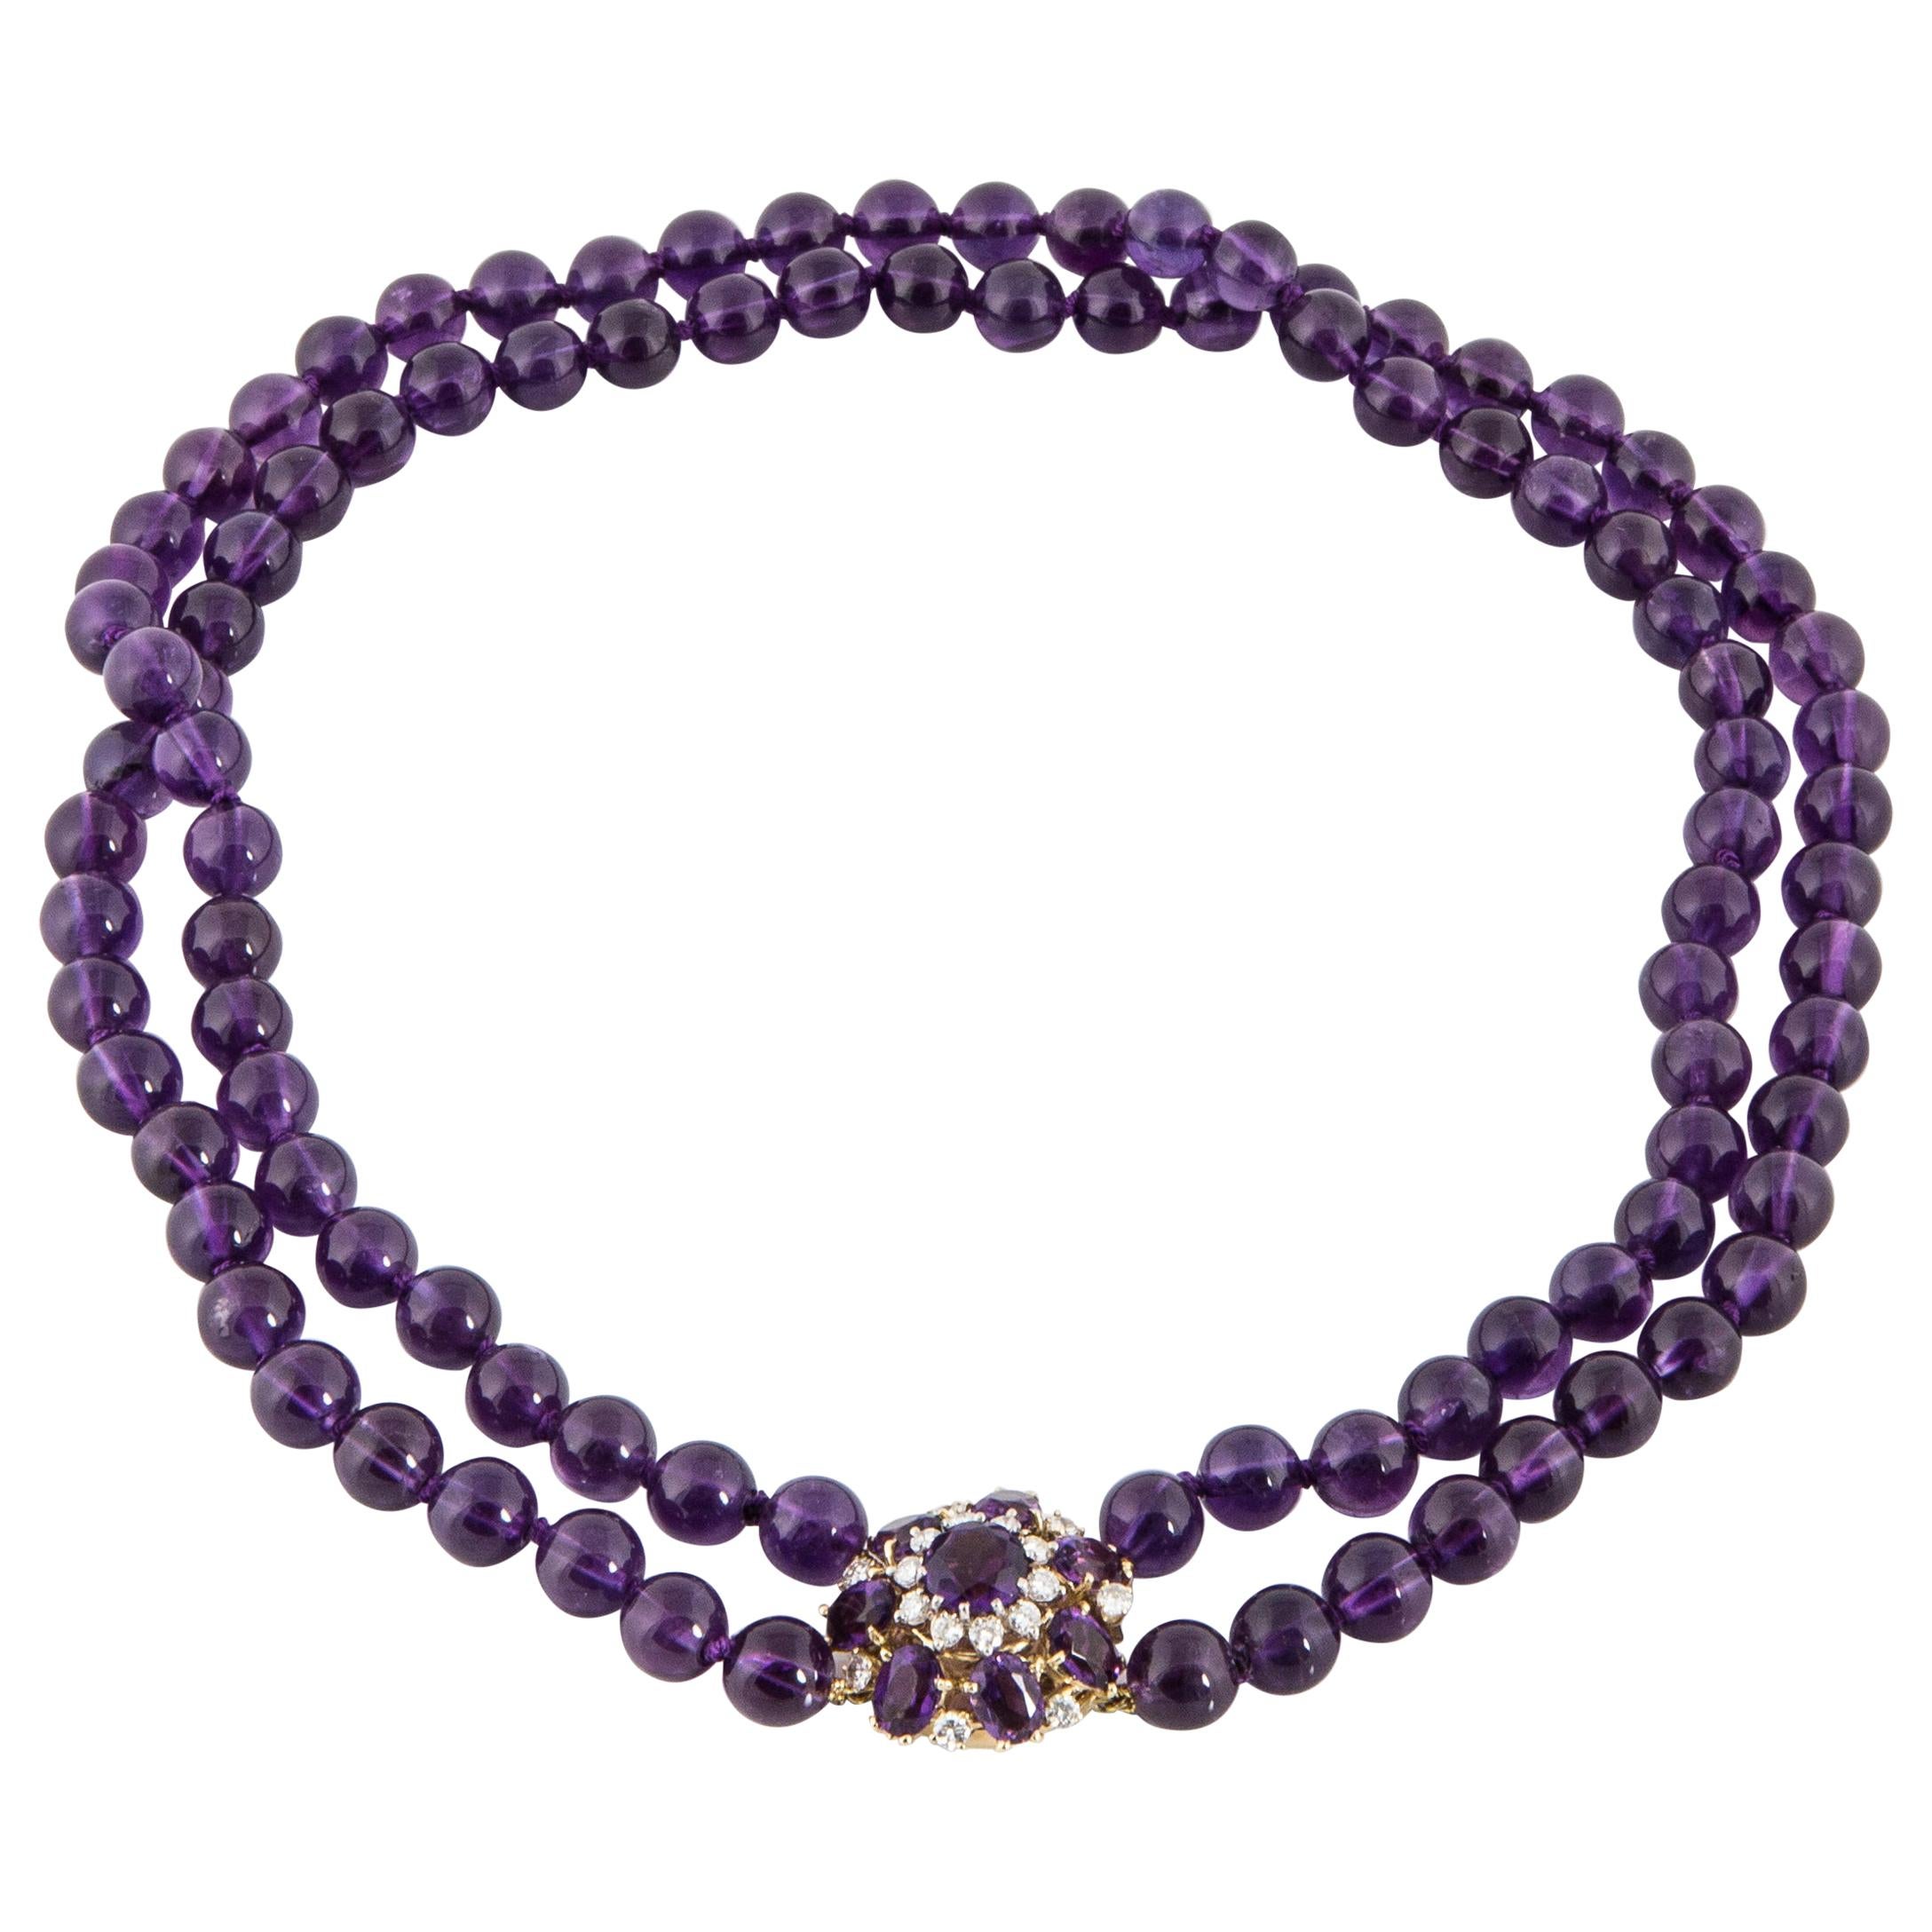 Amethyst Bead Necklace with Diamond Clasp